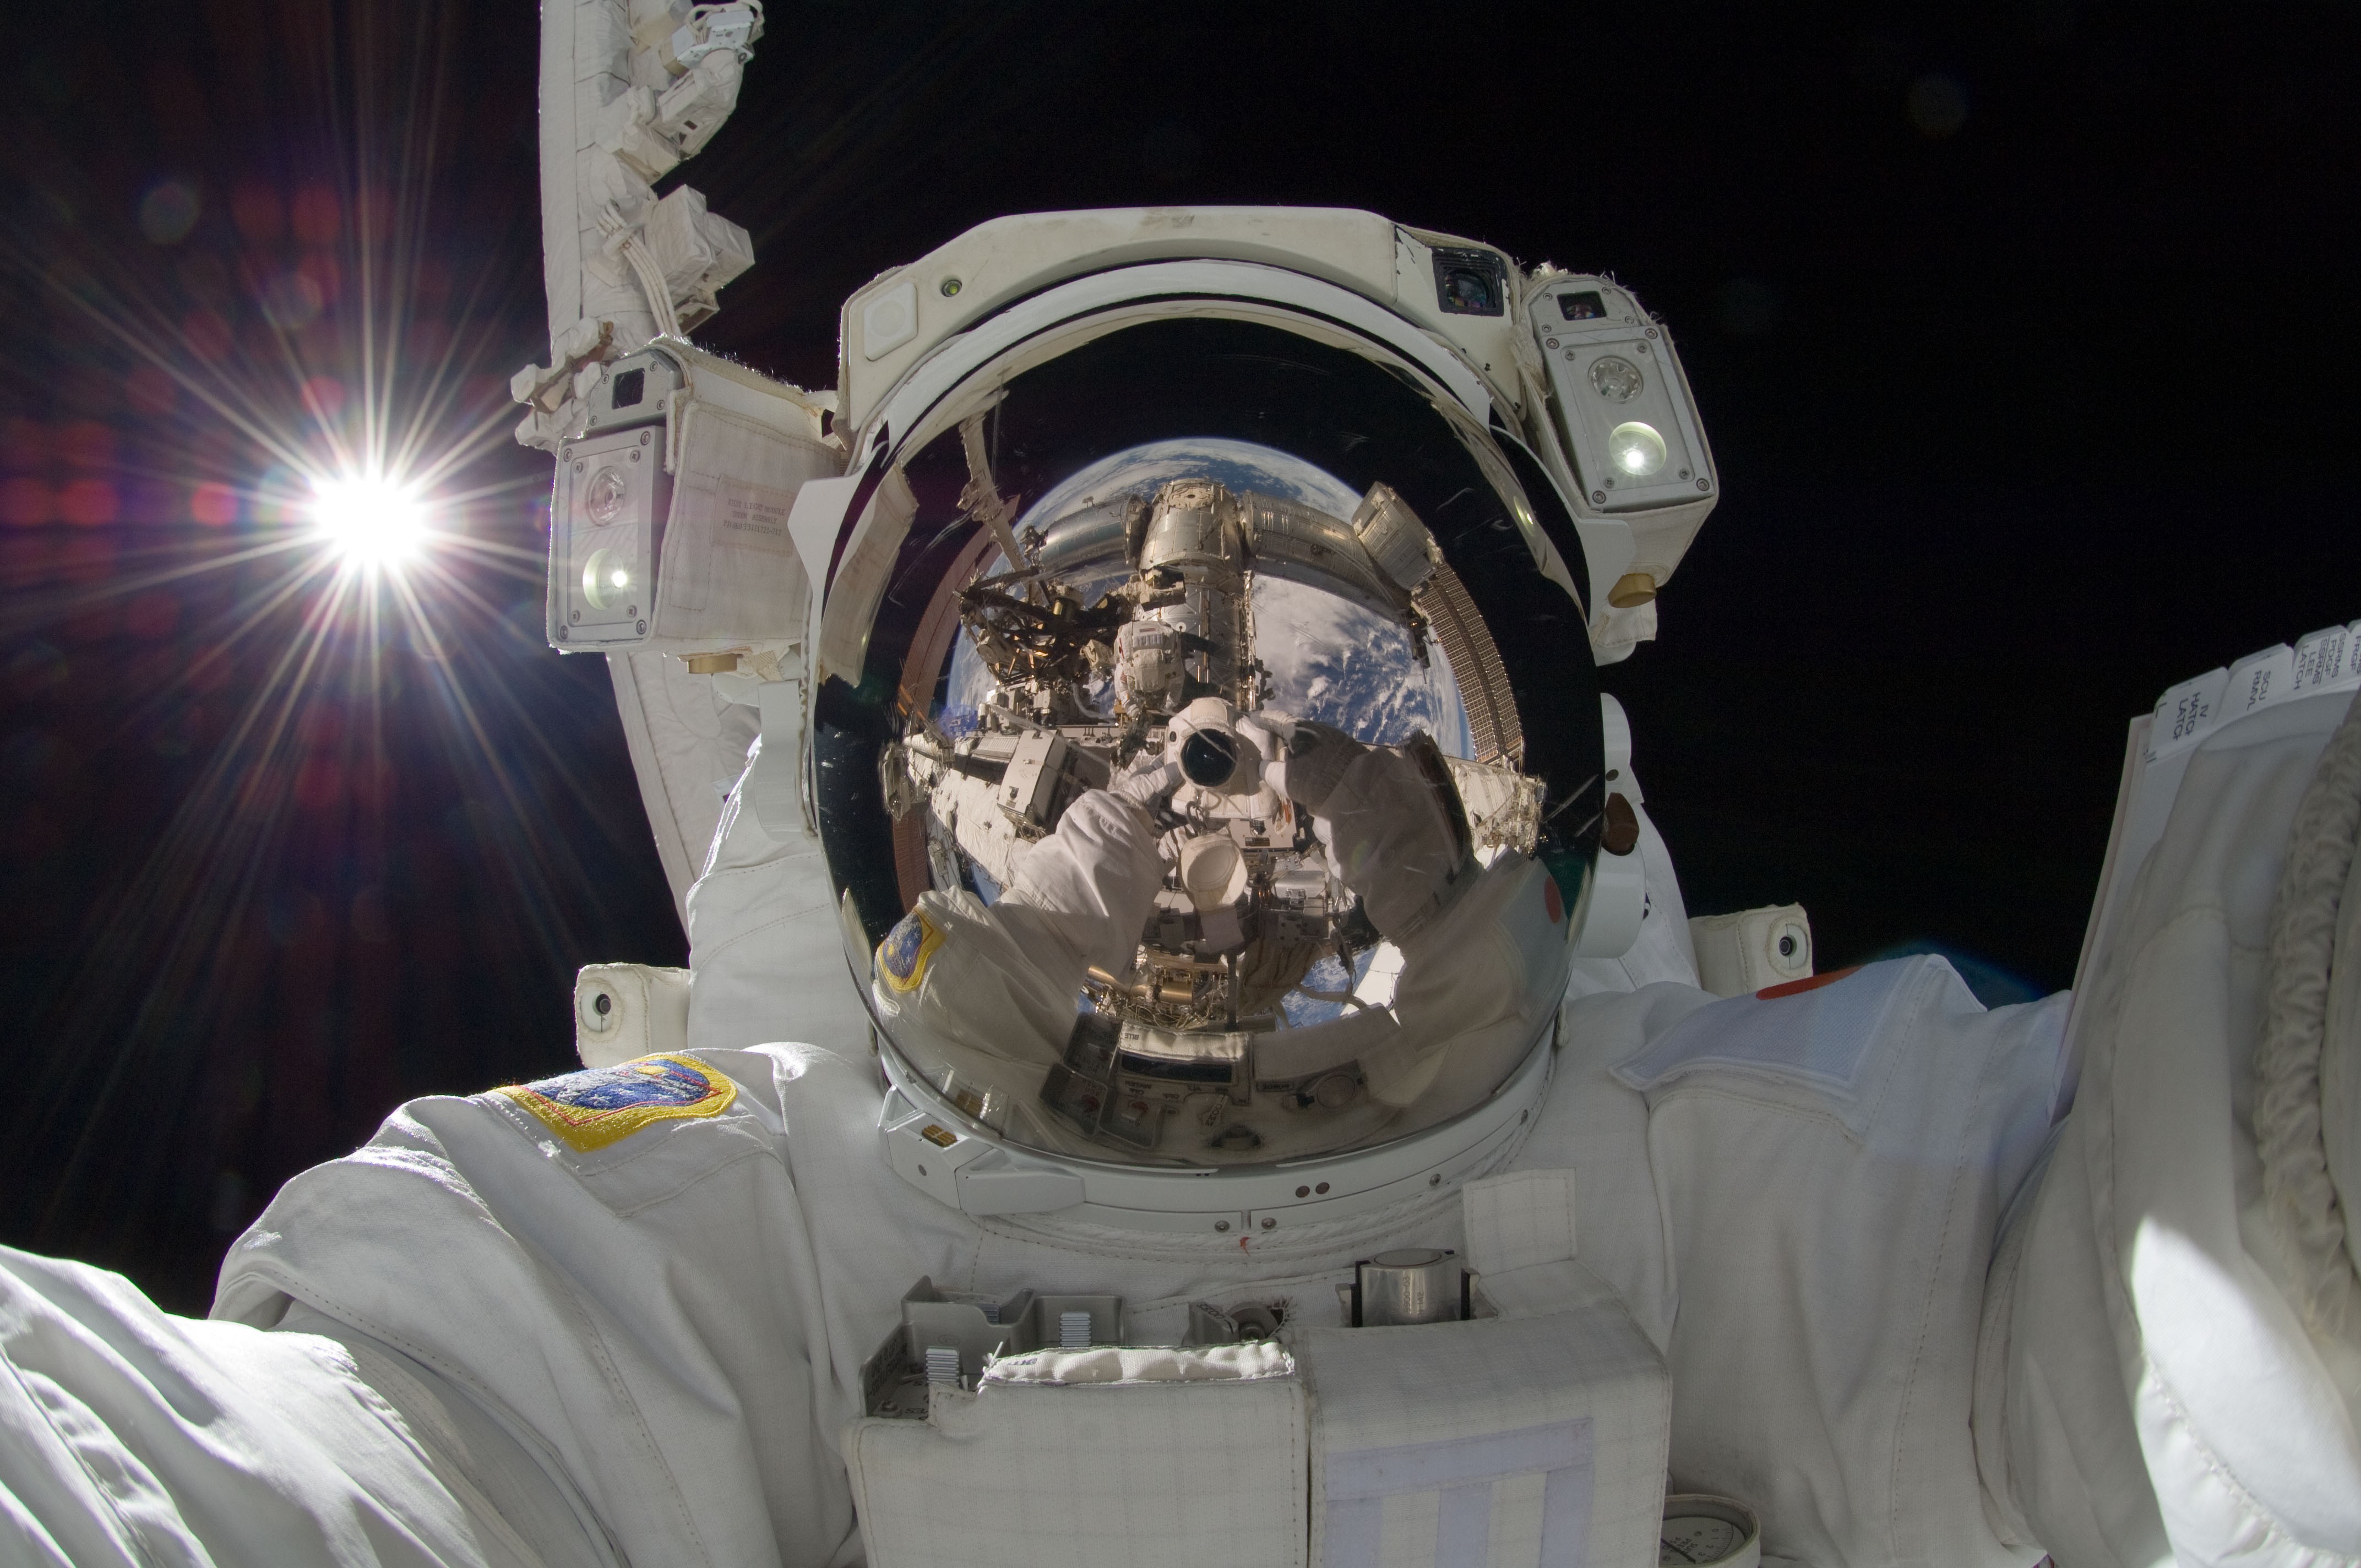 General 4288x2848 space astronaut selfies reflection frontal view portrait lights